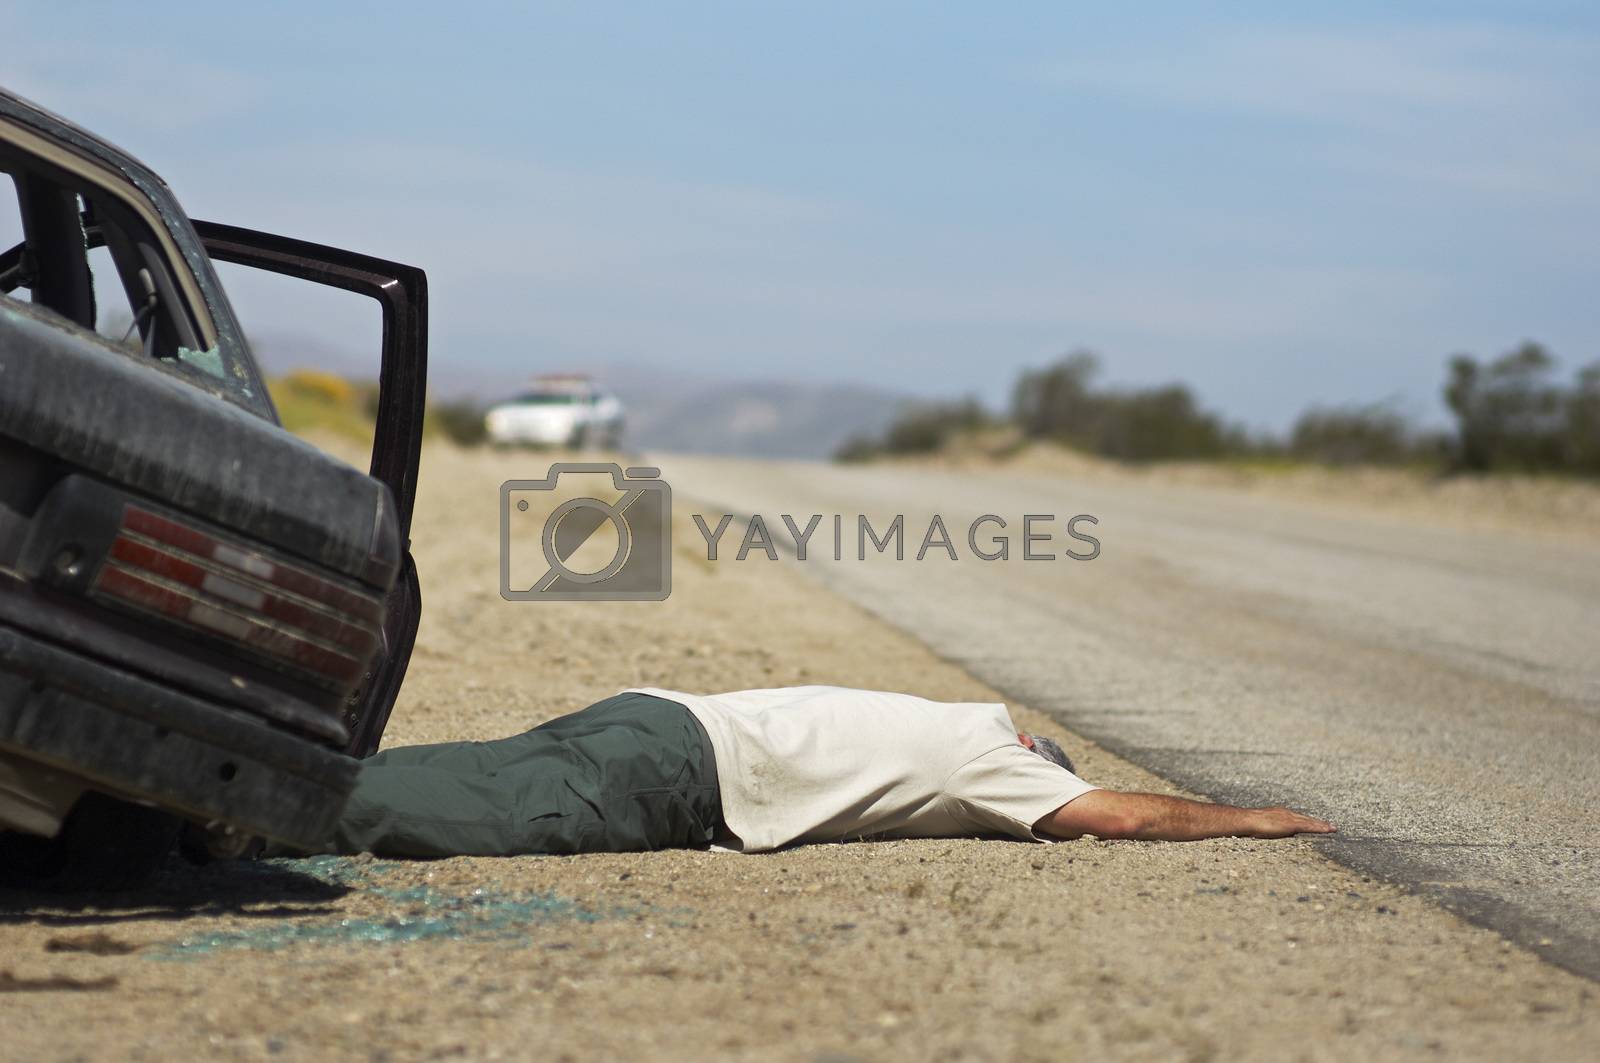 Royalty free image of Victim of car accident lying on roadside by moodboard